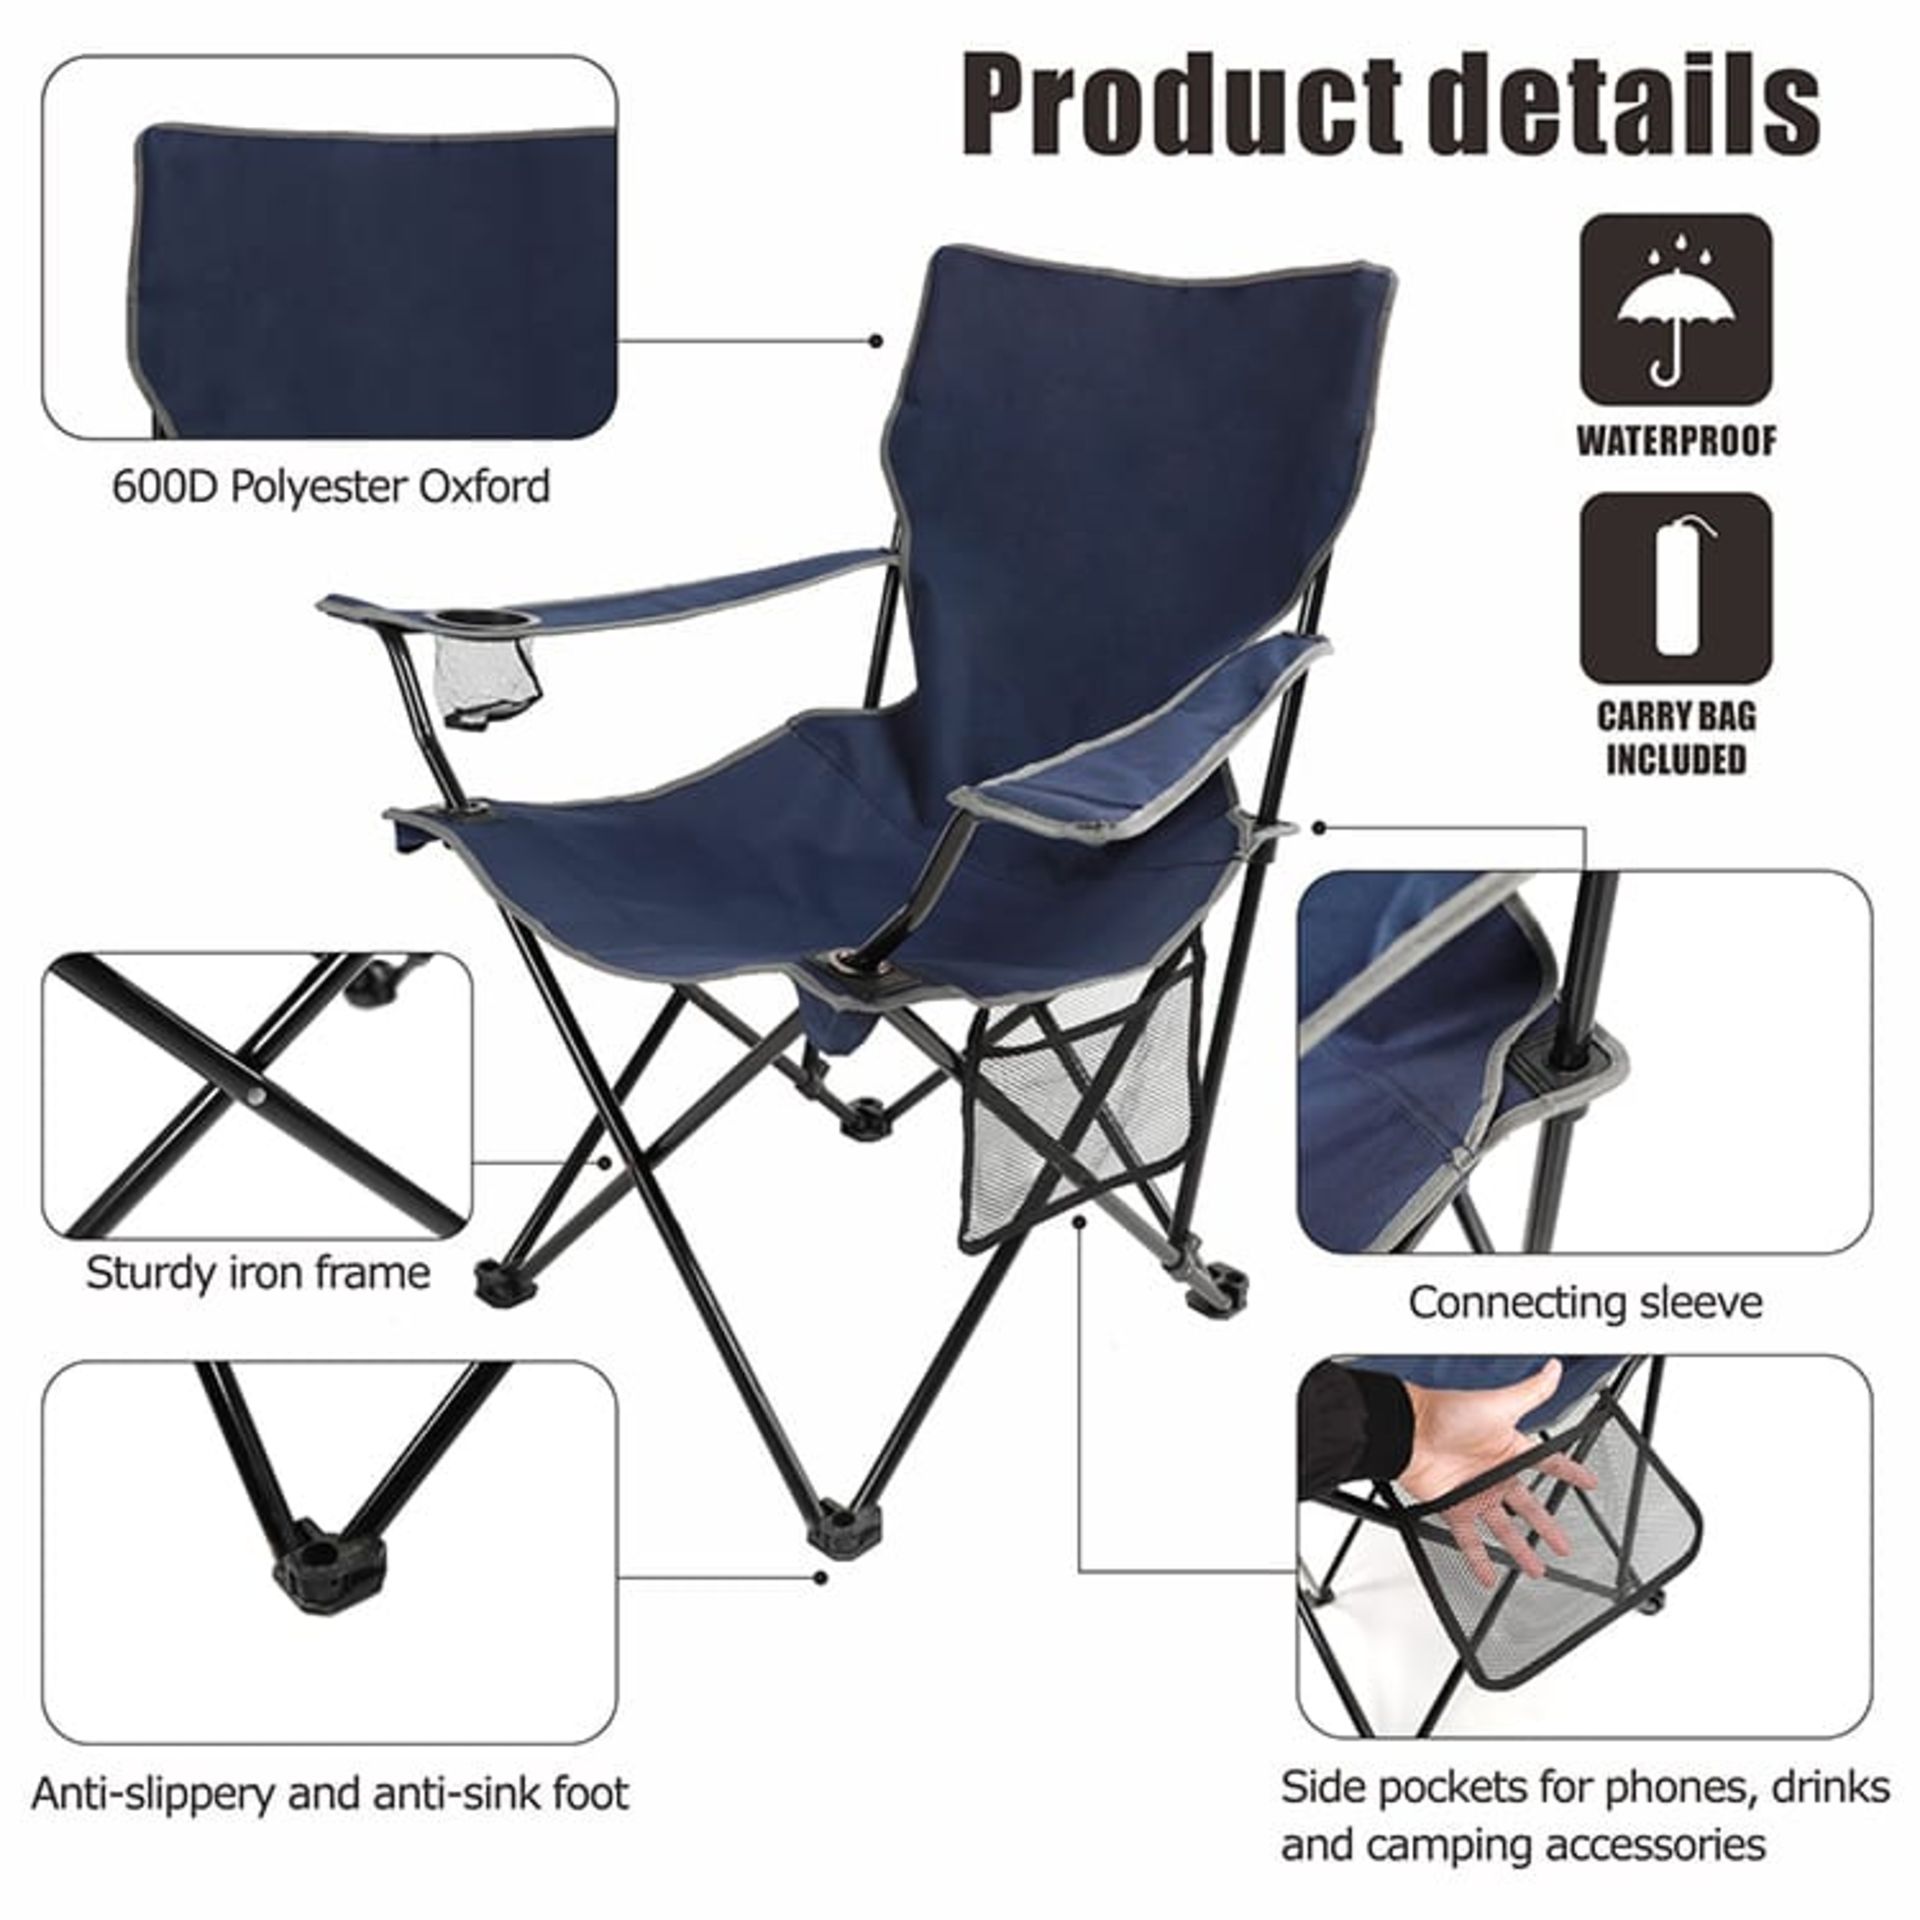 UNITS - RBSM CAMPING FOLDING CHAIRS W/ CARRYING BAGS - NAVY BLUE (NEW) (MSRP $75) - Bild 2 aus 4